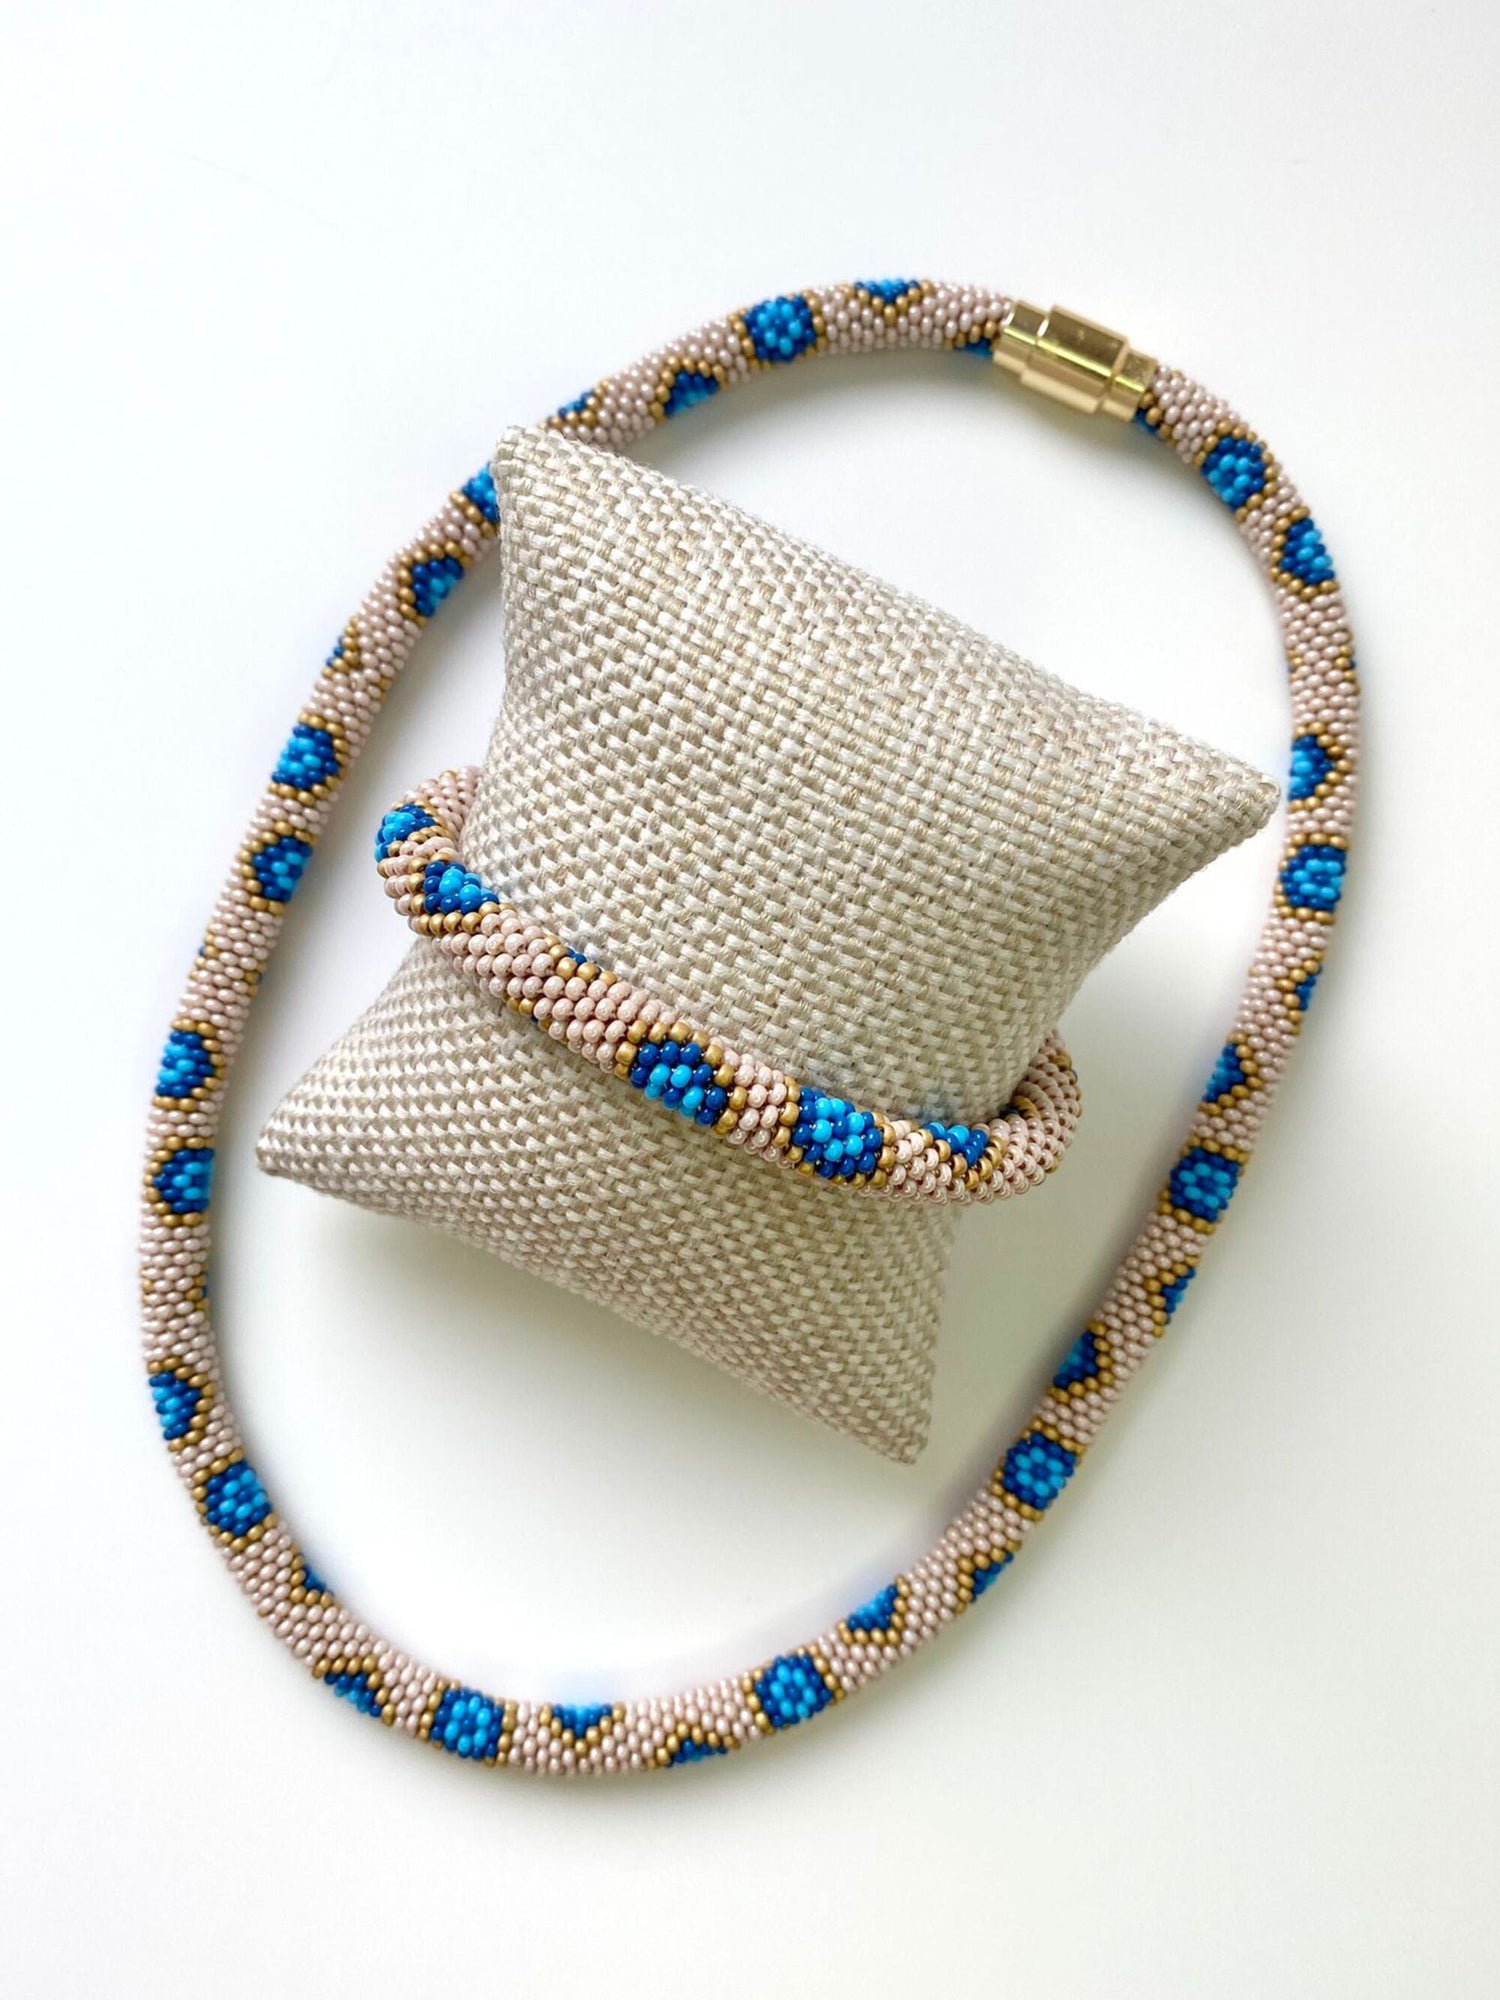 Cream, yellow, and blue bracelet with gold magnetic closure and matching necklace.